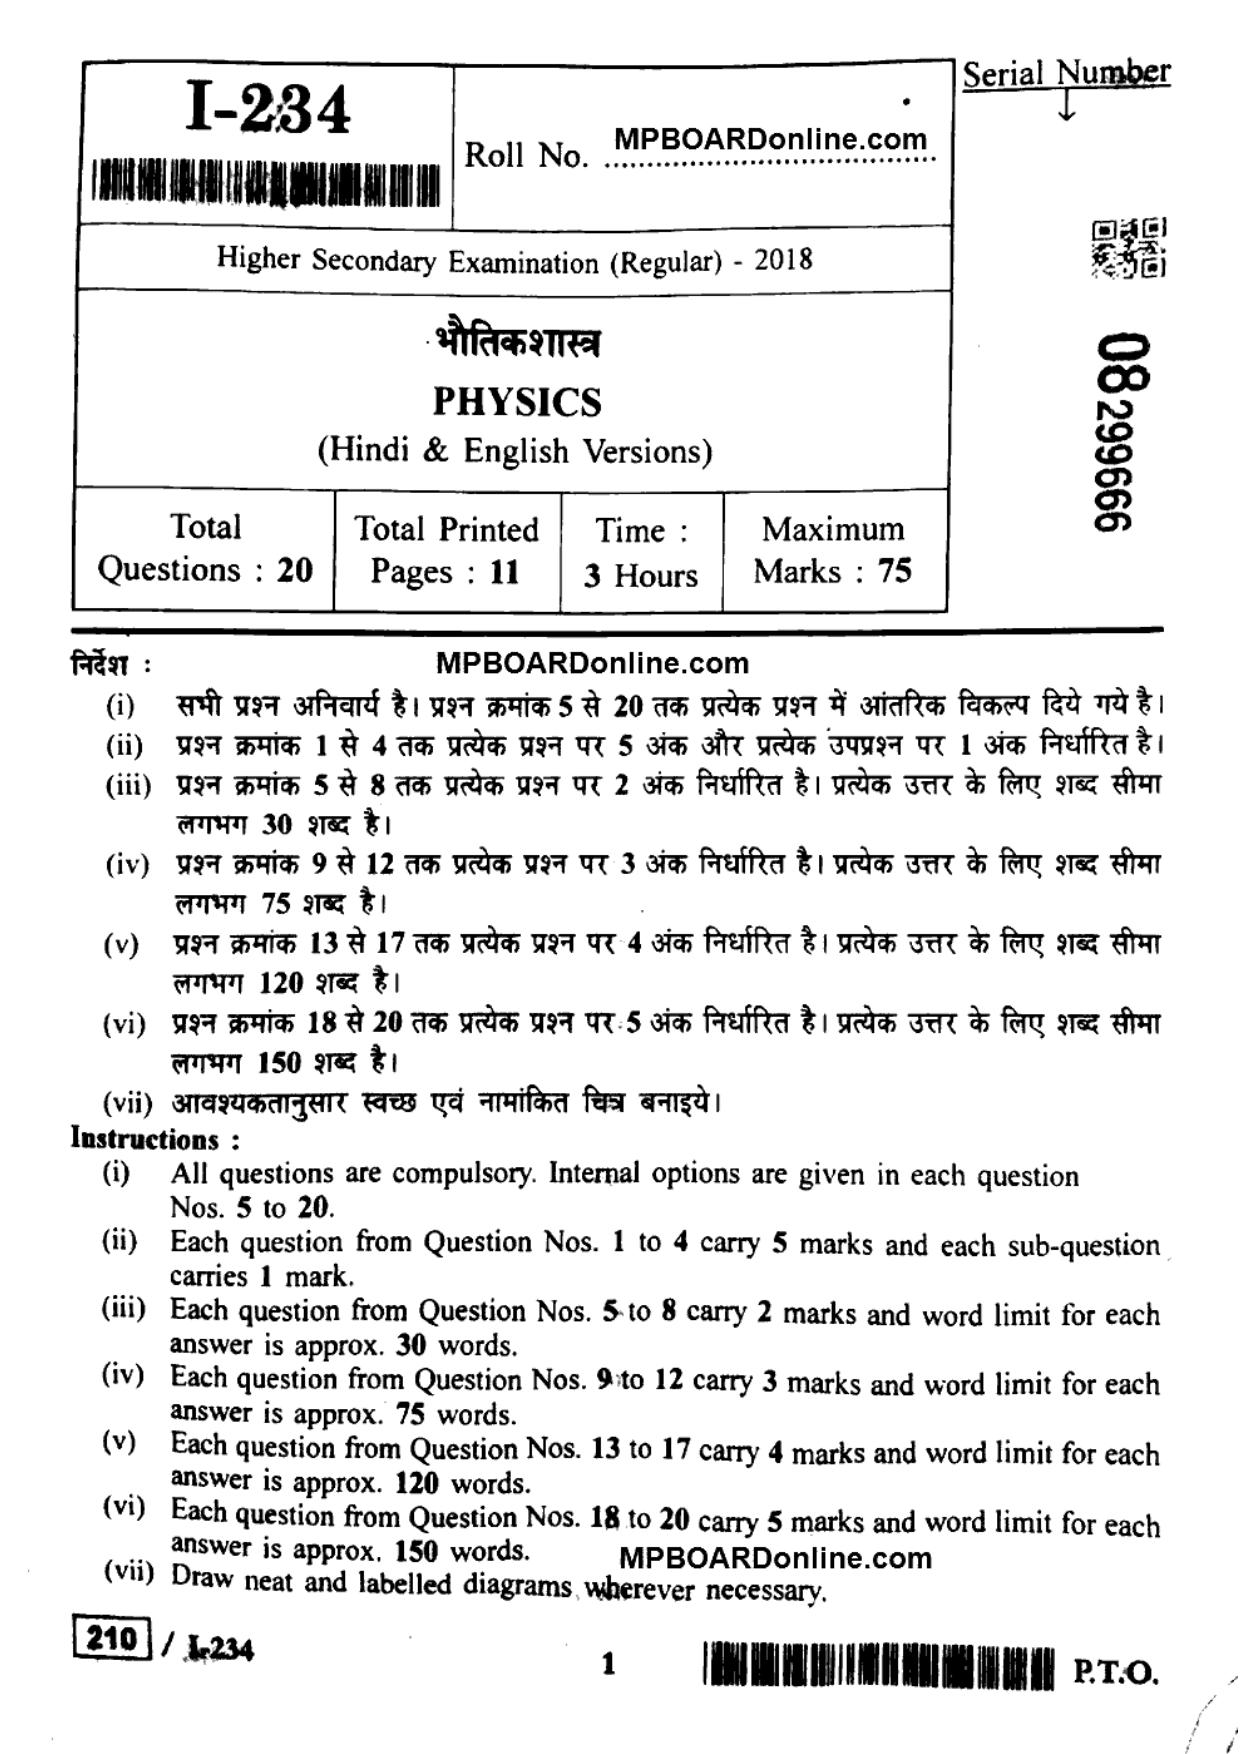 MP Board Class 12 Physics 2018 Question Paper - Page 1